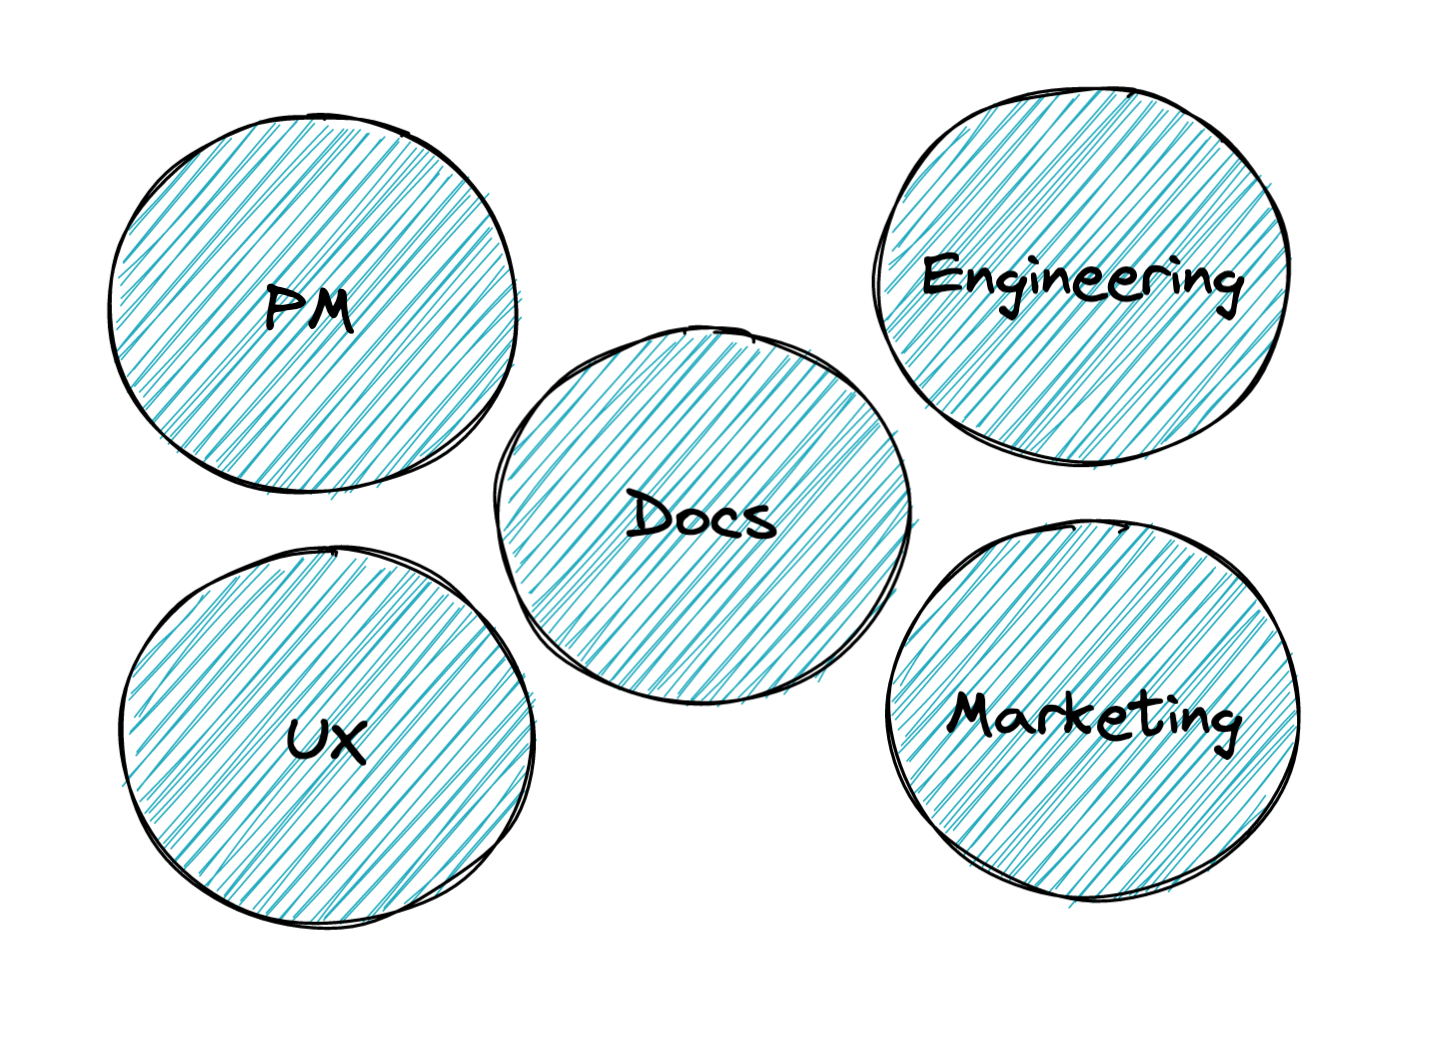 Diagram with 5 circles, 1 each representing PM, UX, Docs, Engineering, and Marketing.